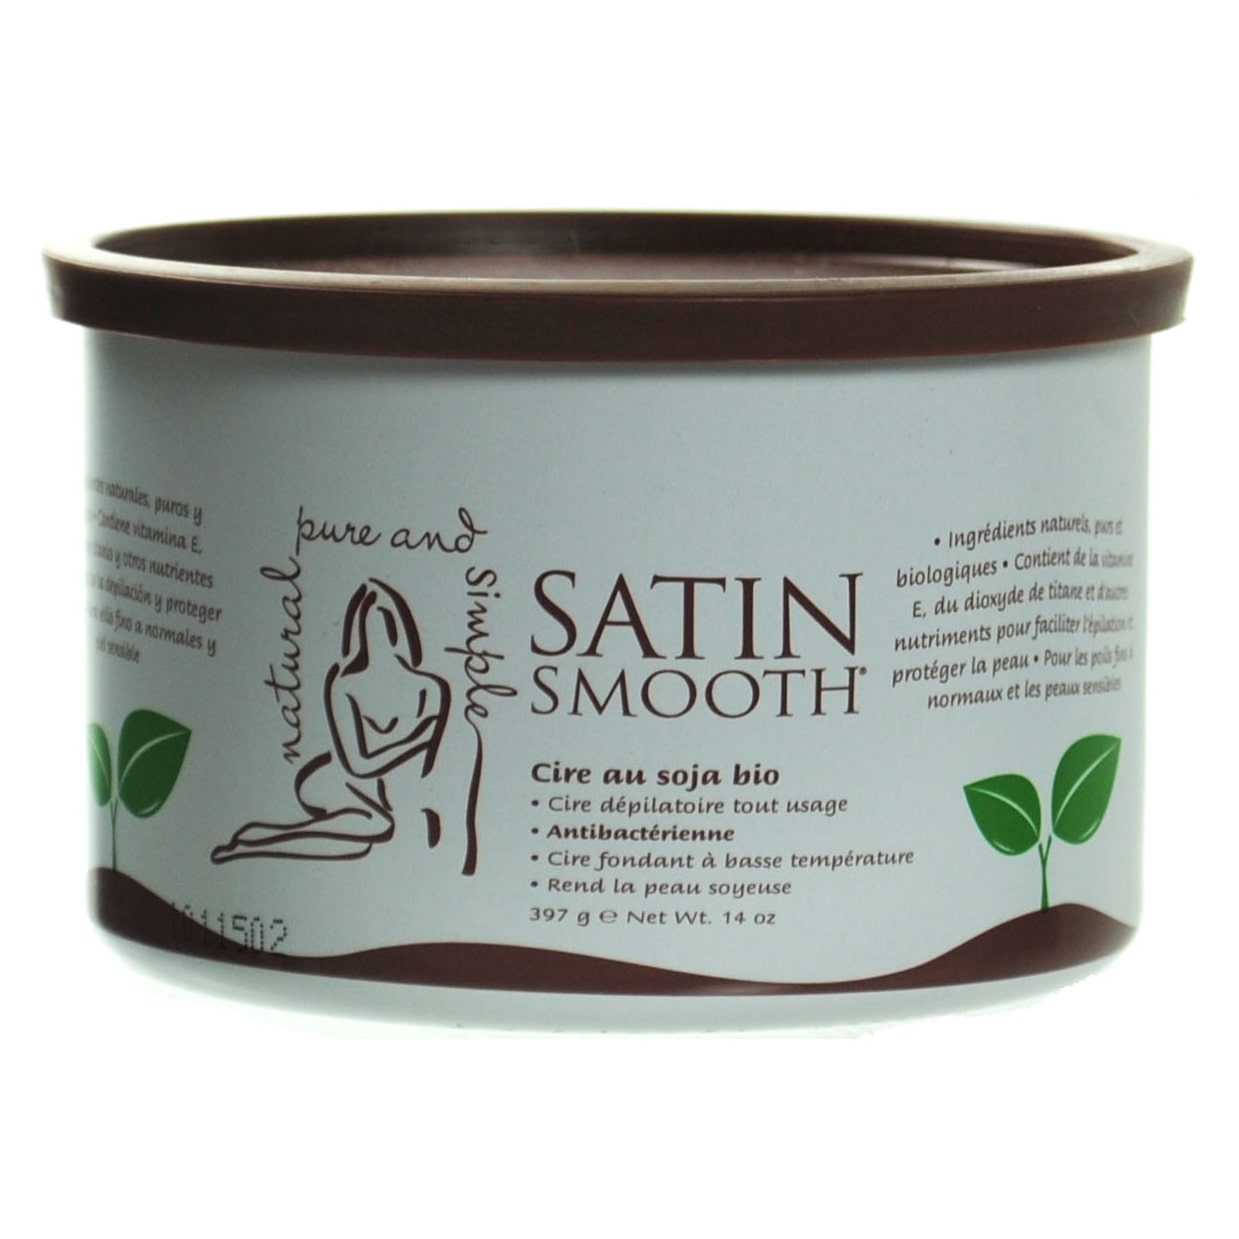 satin smooth organic soy wax, 14 ounce - image 2 of 2